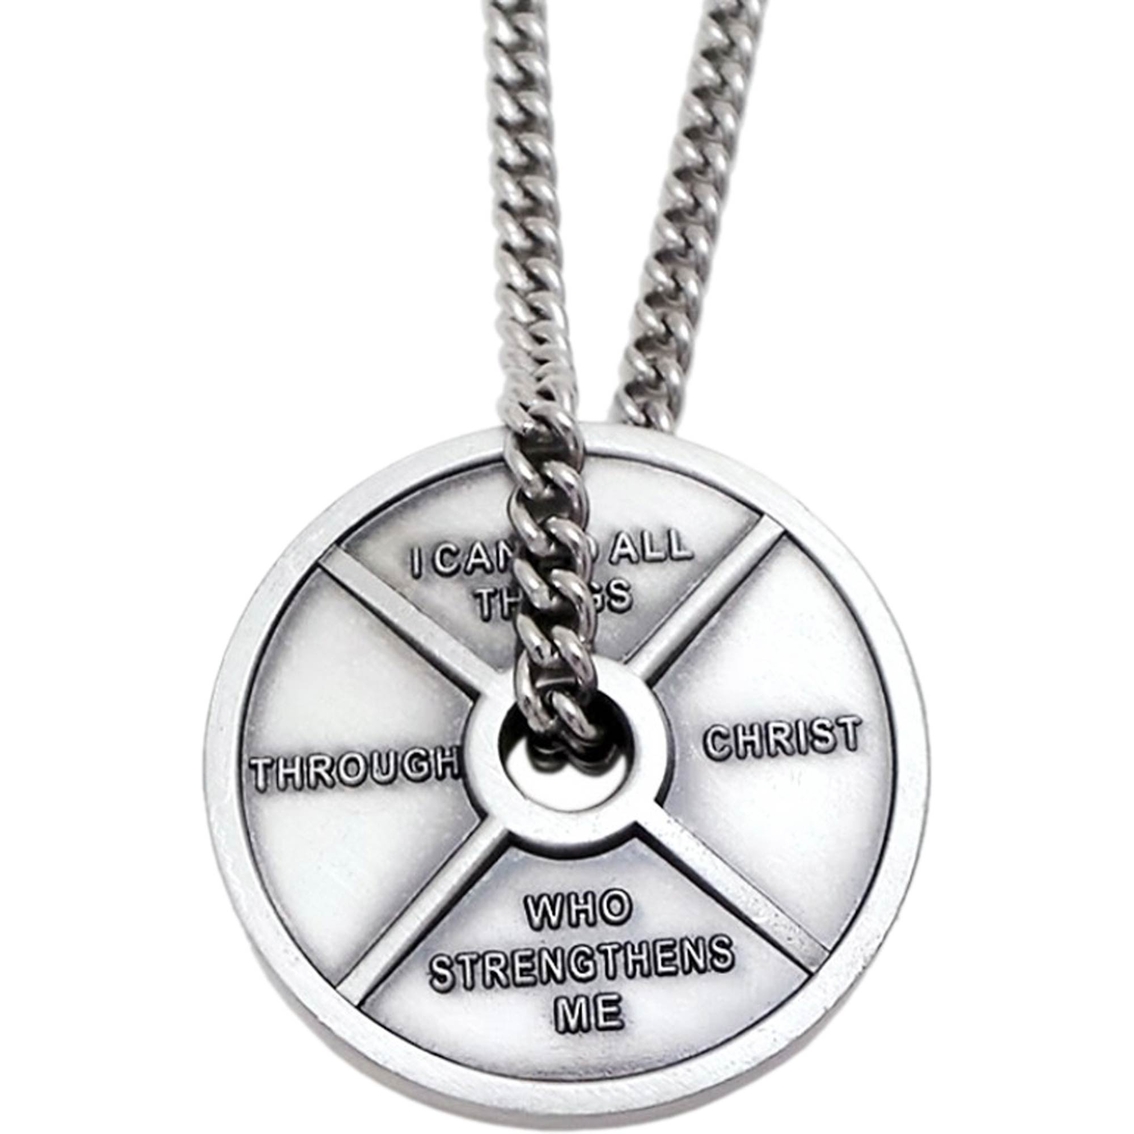 Shields of Strength Men's Stainless Steel Stack Plate Dumbbell Necklace, Phil 4:13 - Image 2 of 2